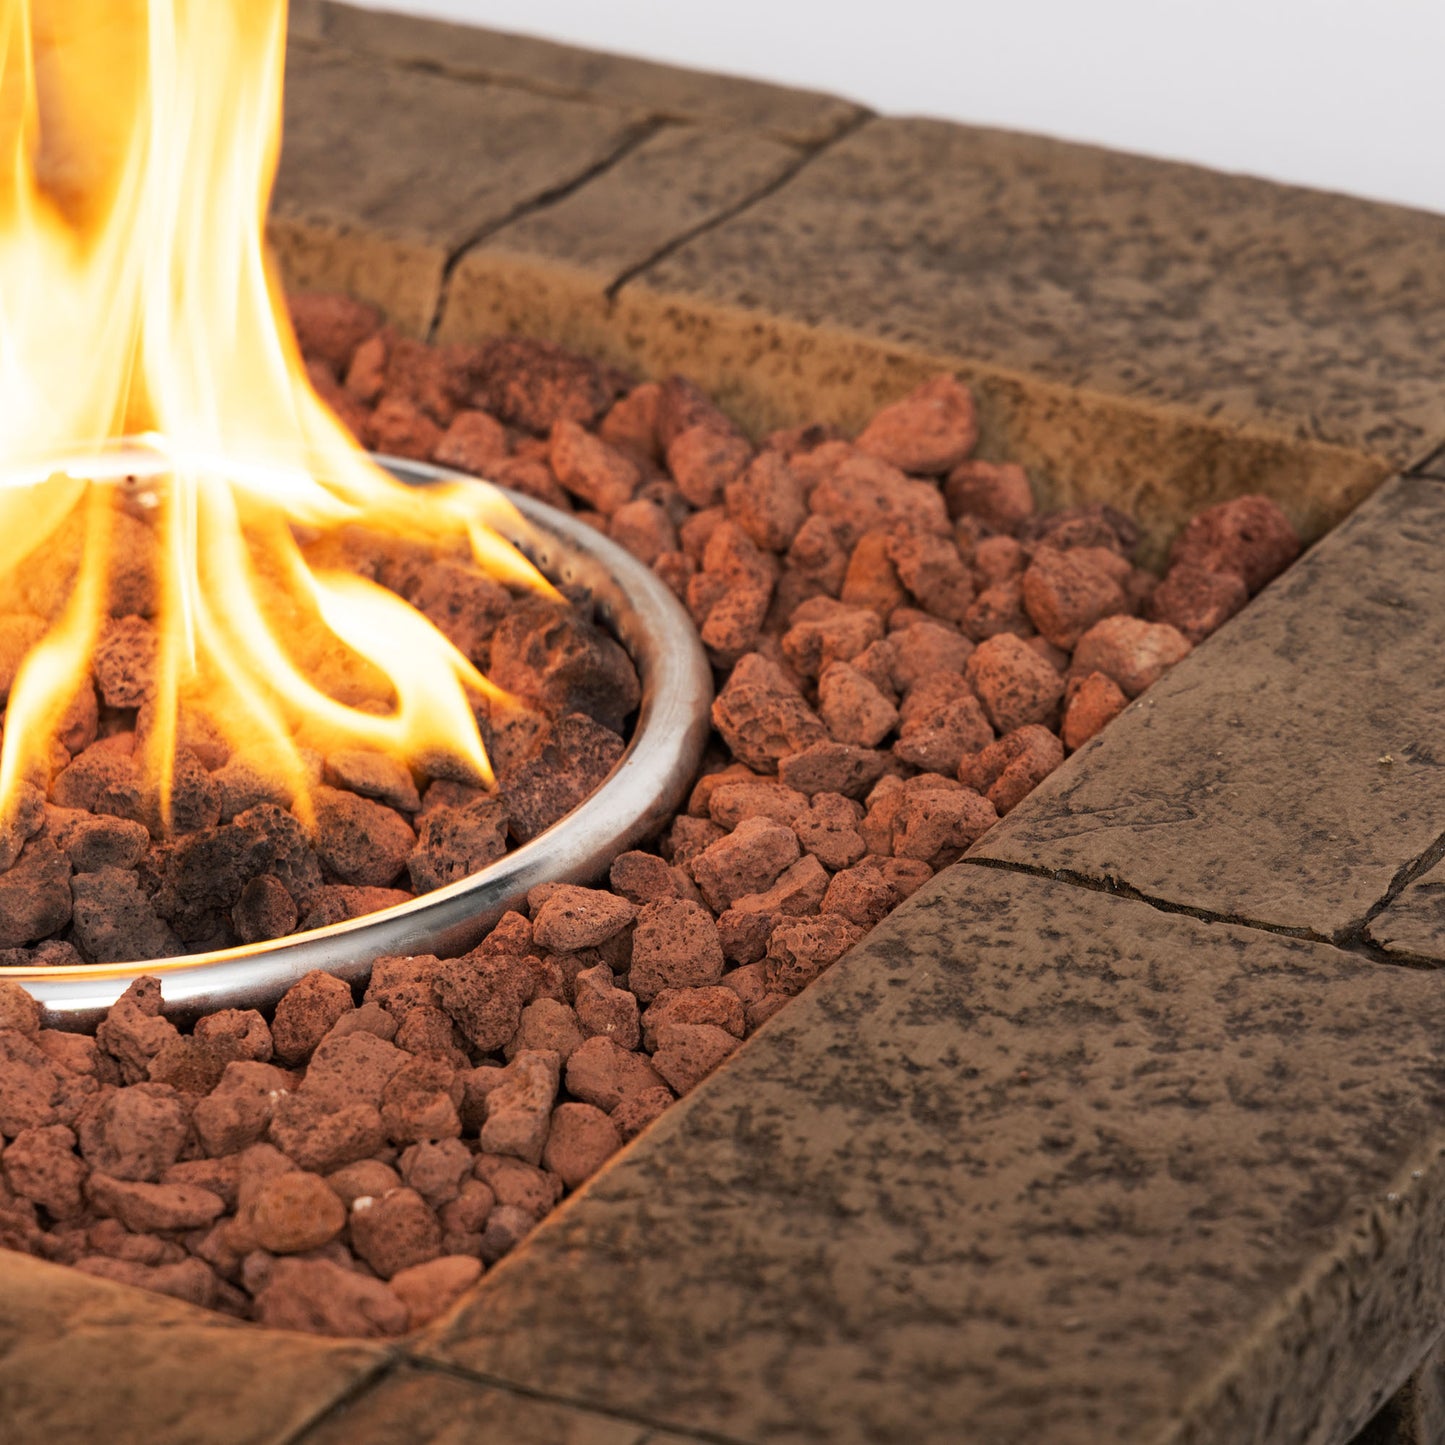 Faux Stone Propane Fire Pit Table with Adjustable Flame and Lava Rocks